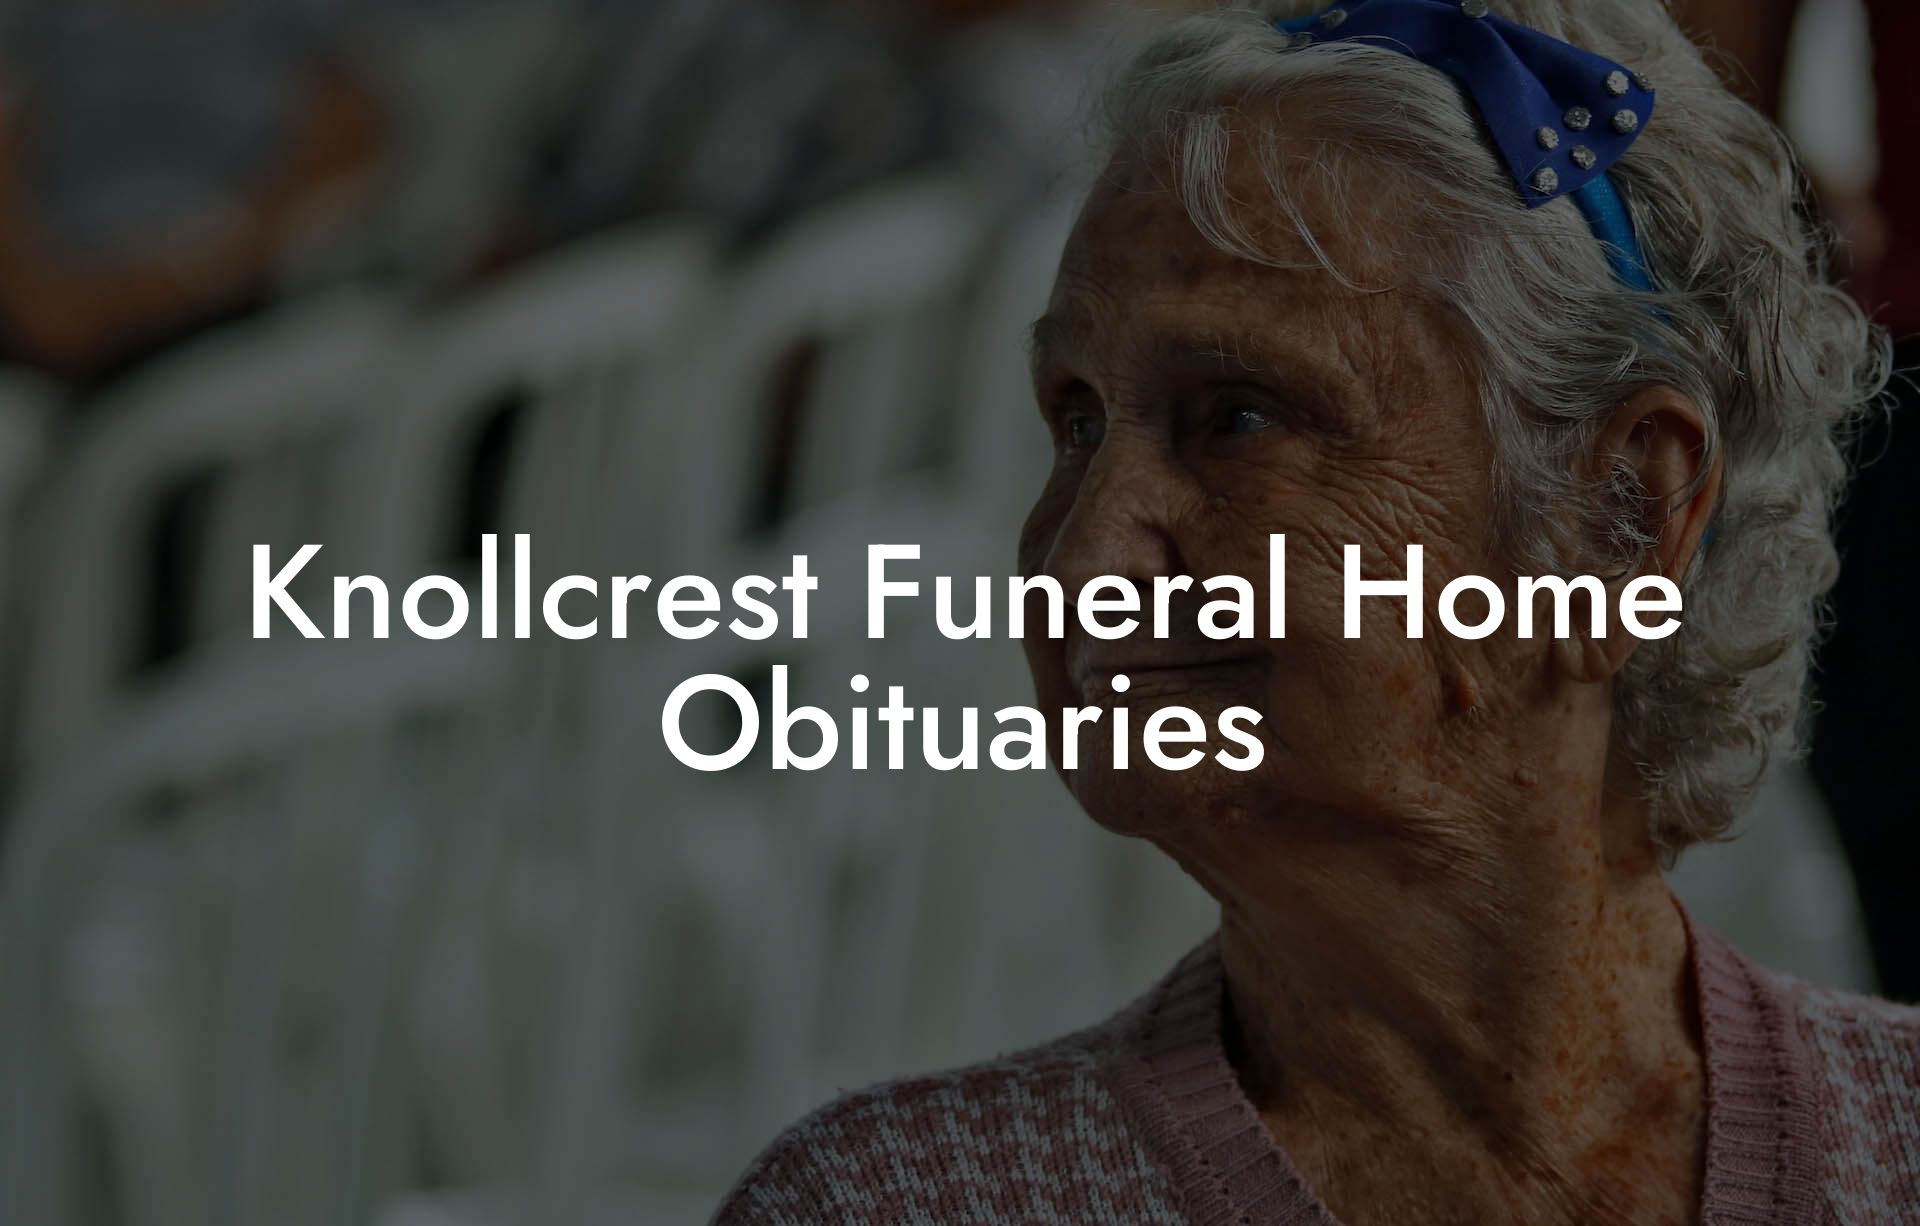 Knollcrest Funeral Home Obituaries